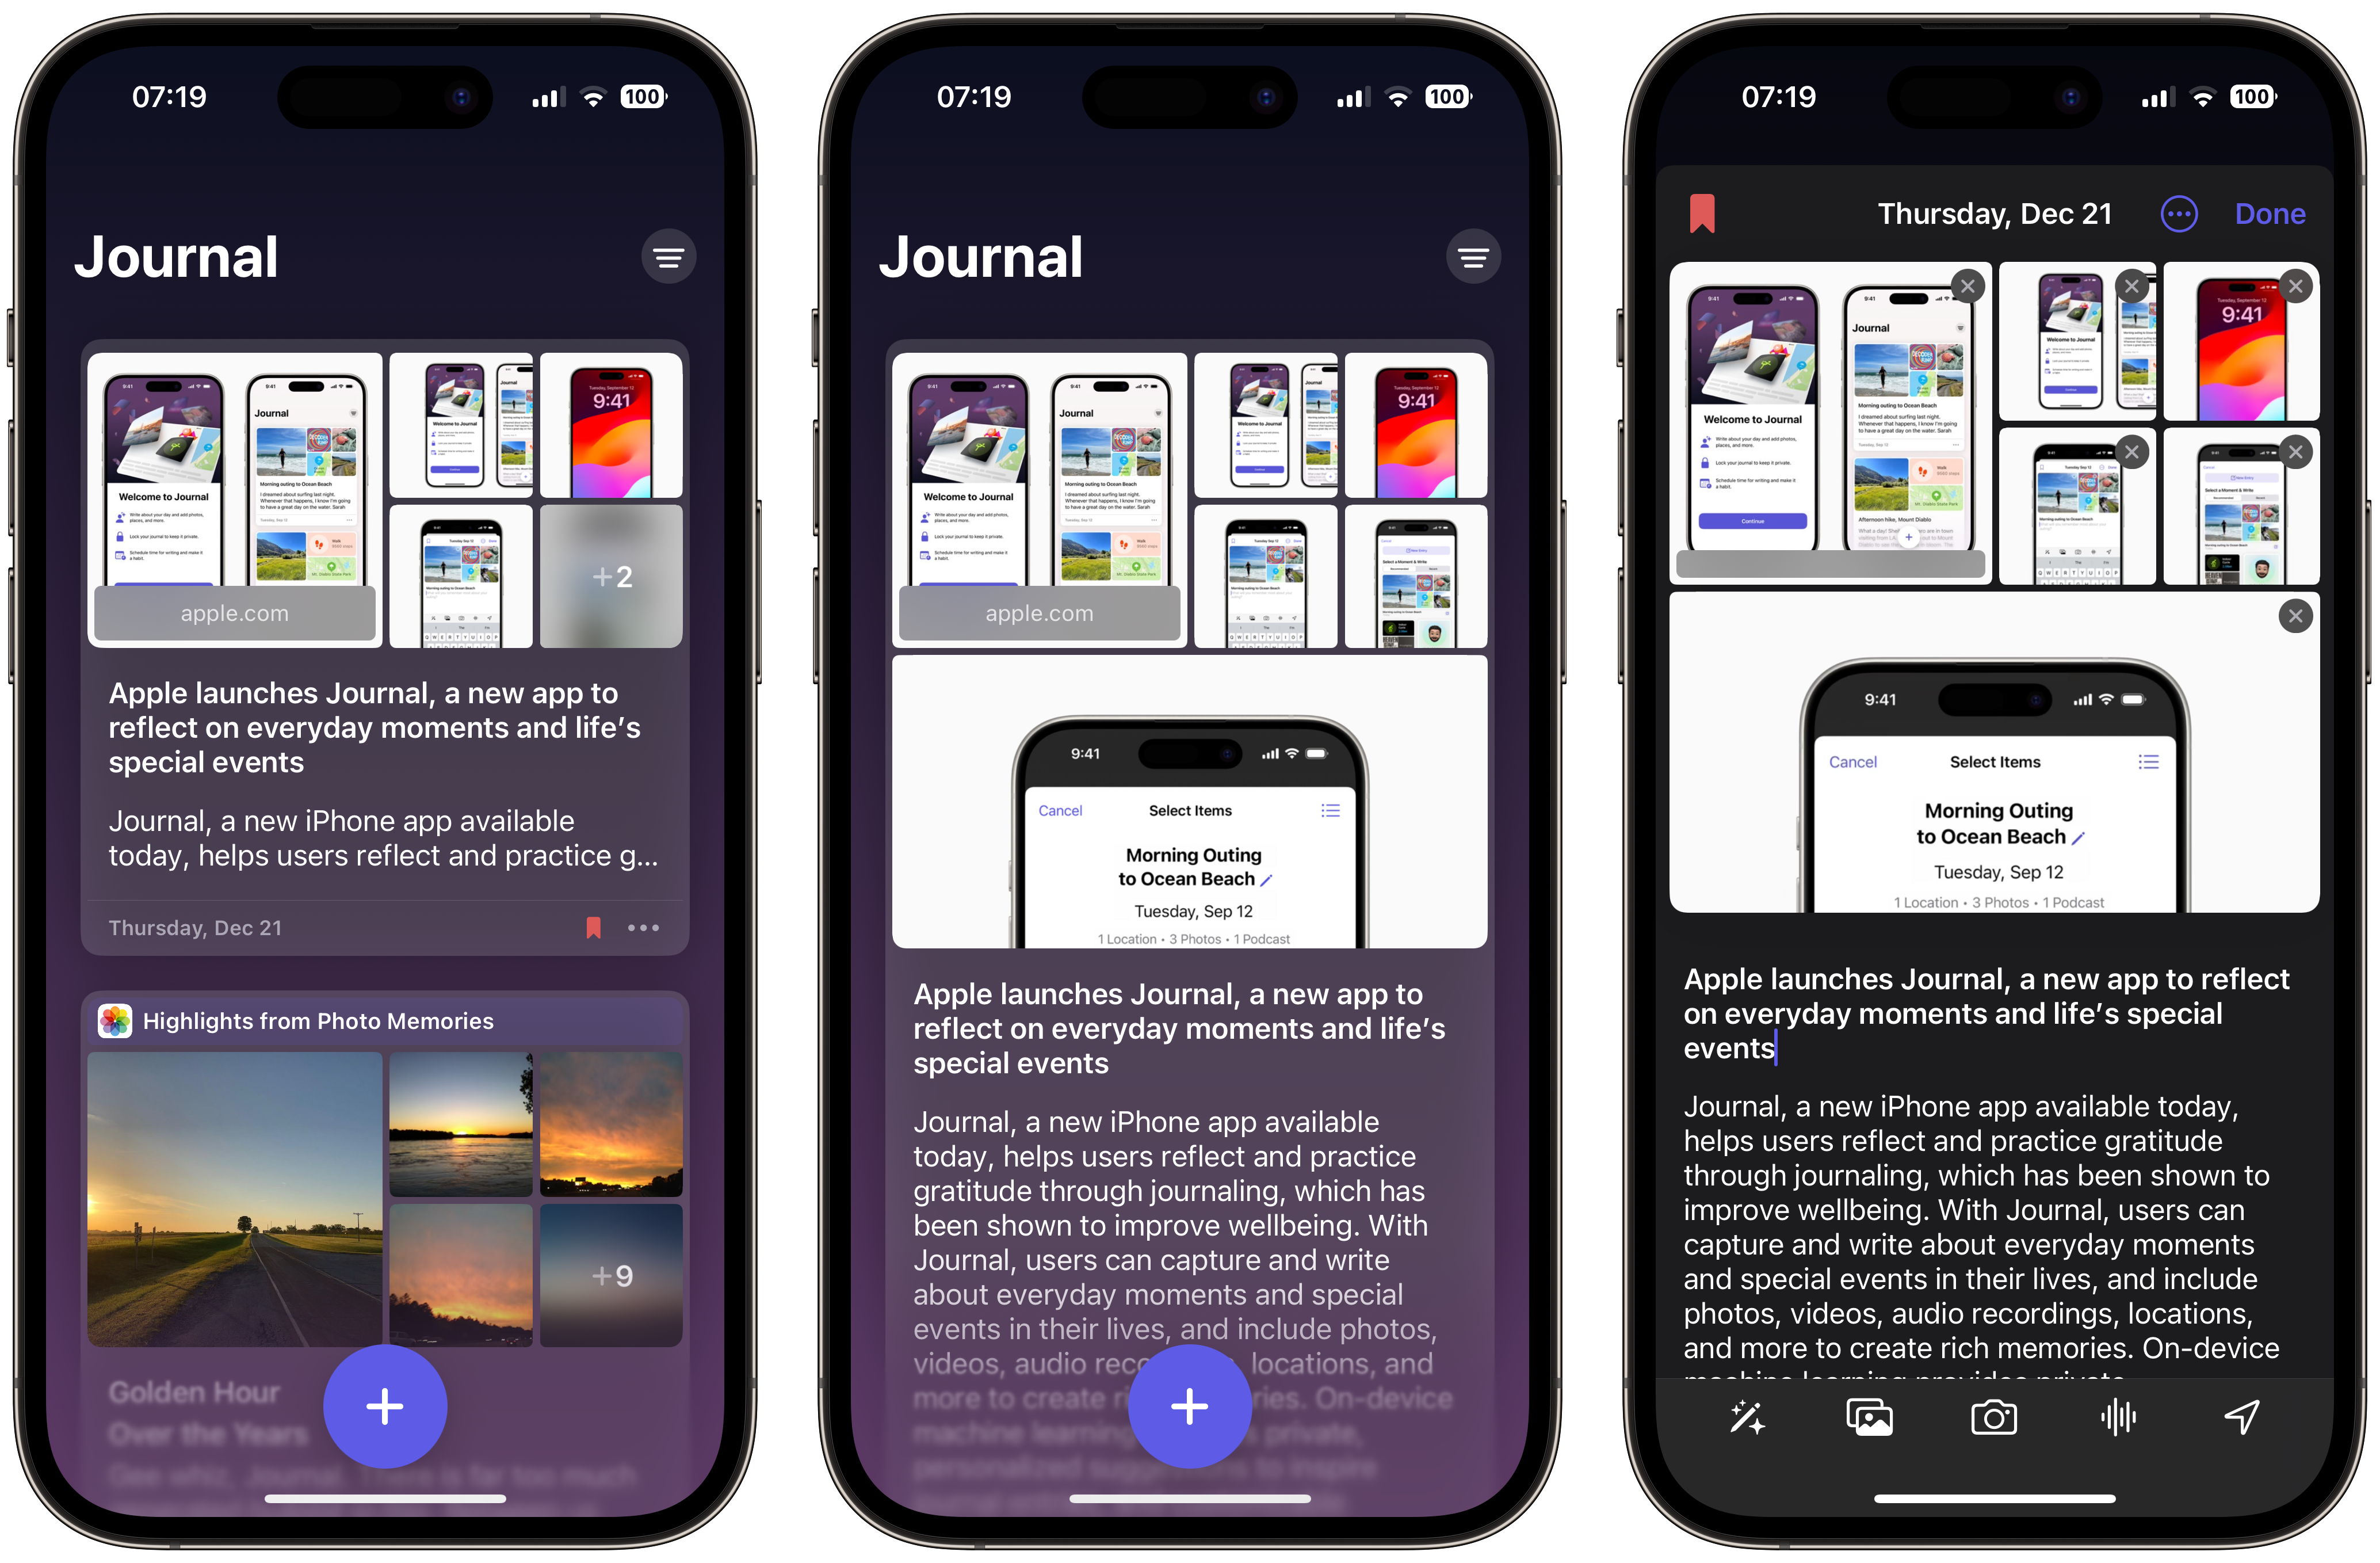 Saving the Journal App press release in the Journal App